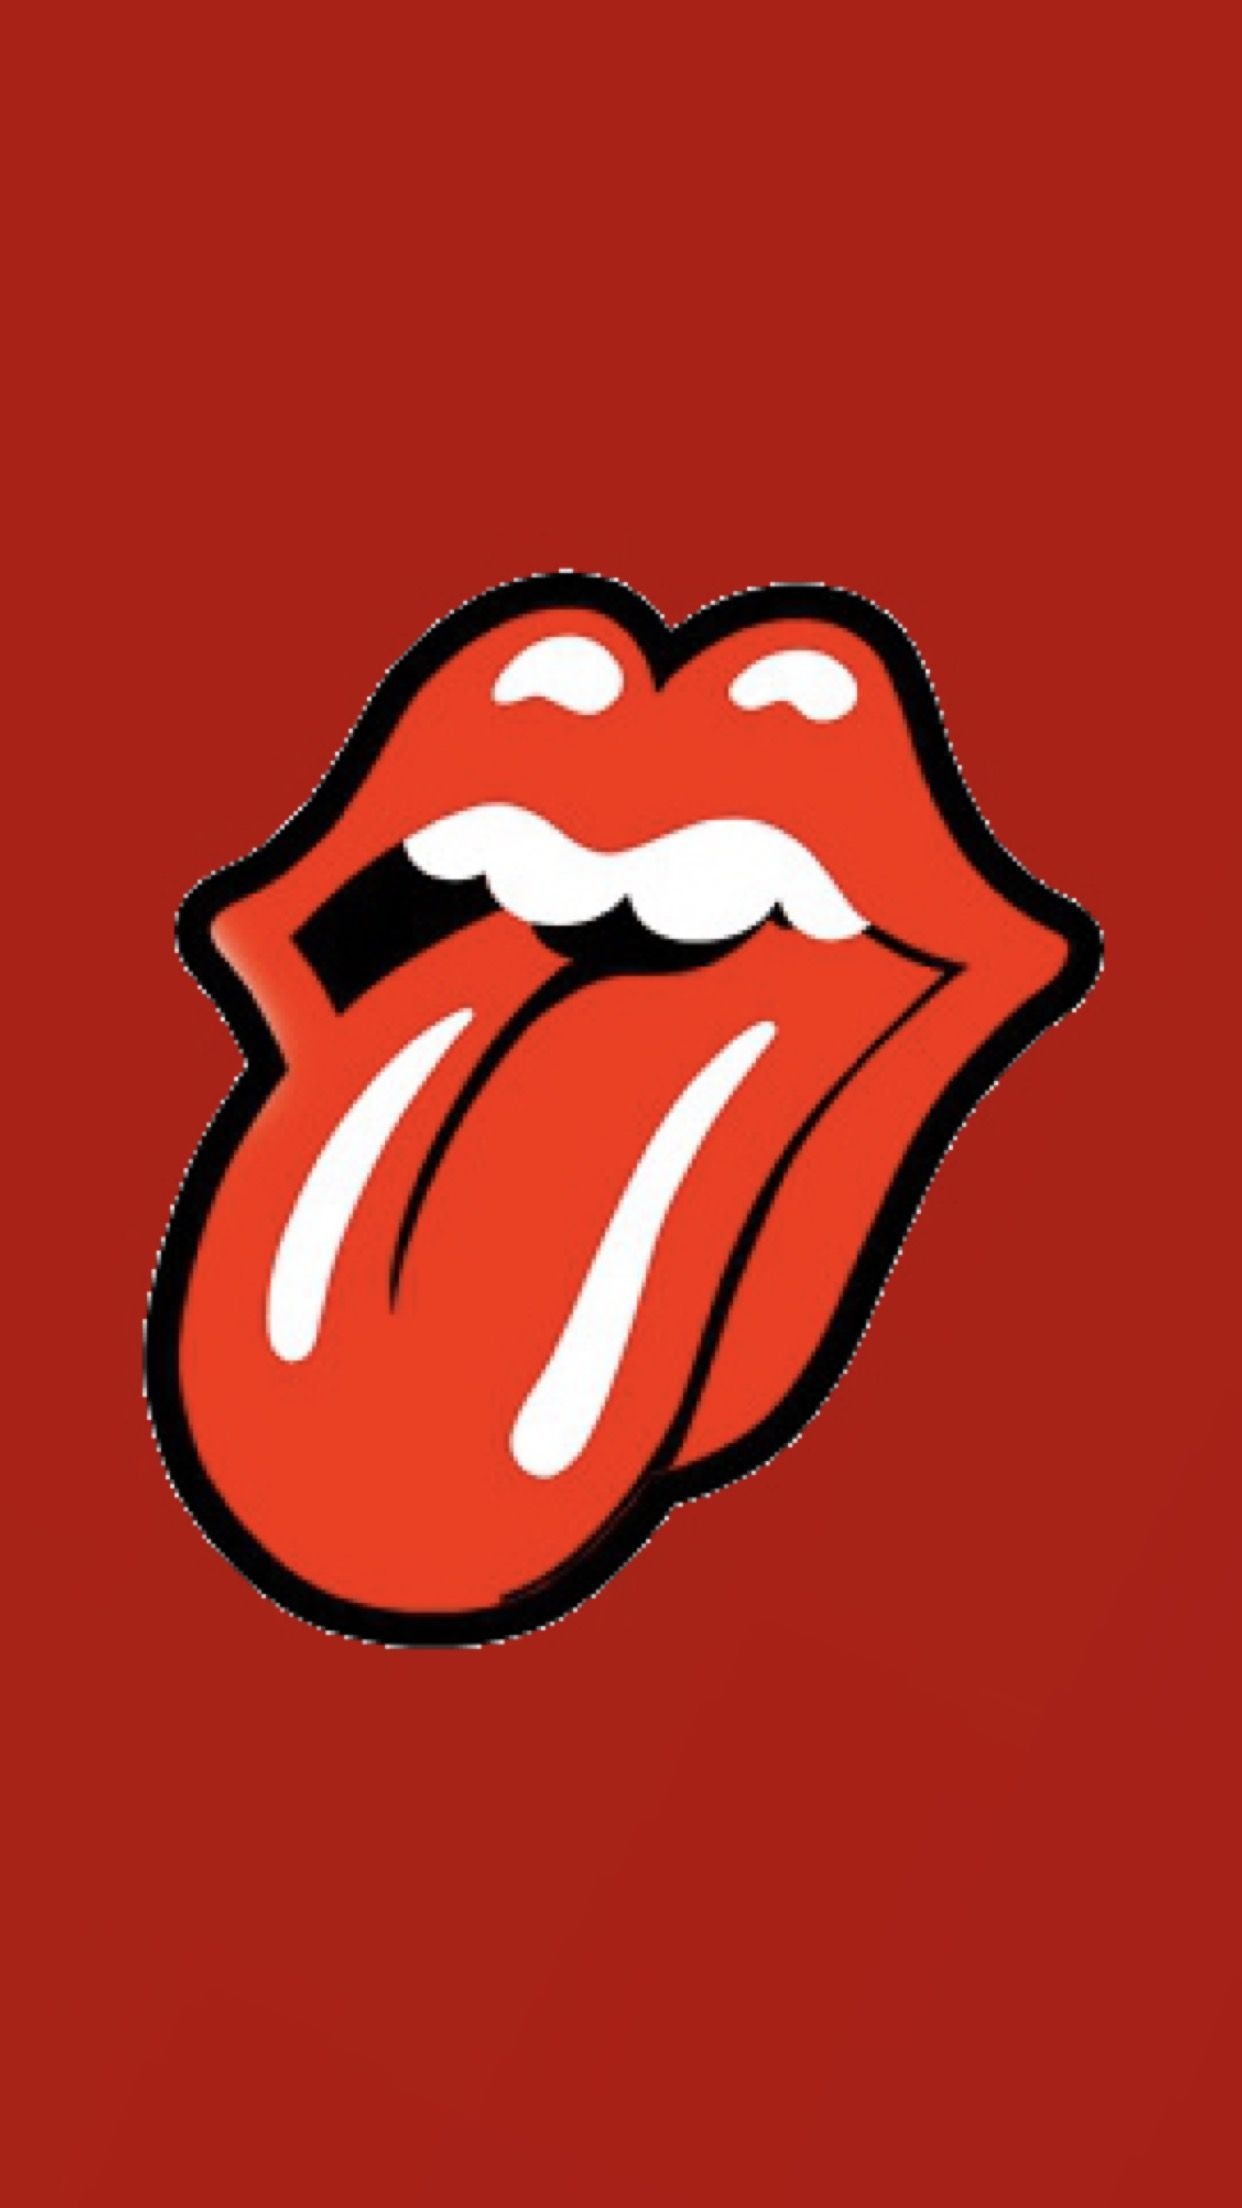 The Rolling Stones Pin, Collectible music pins, Rolling Stones memorabilia, Fans' favorite pieces, 1250x2210 HD Handy